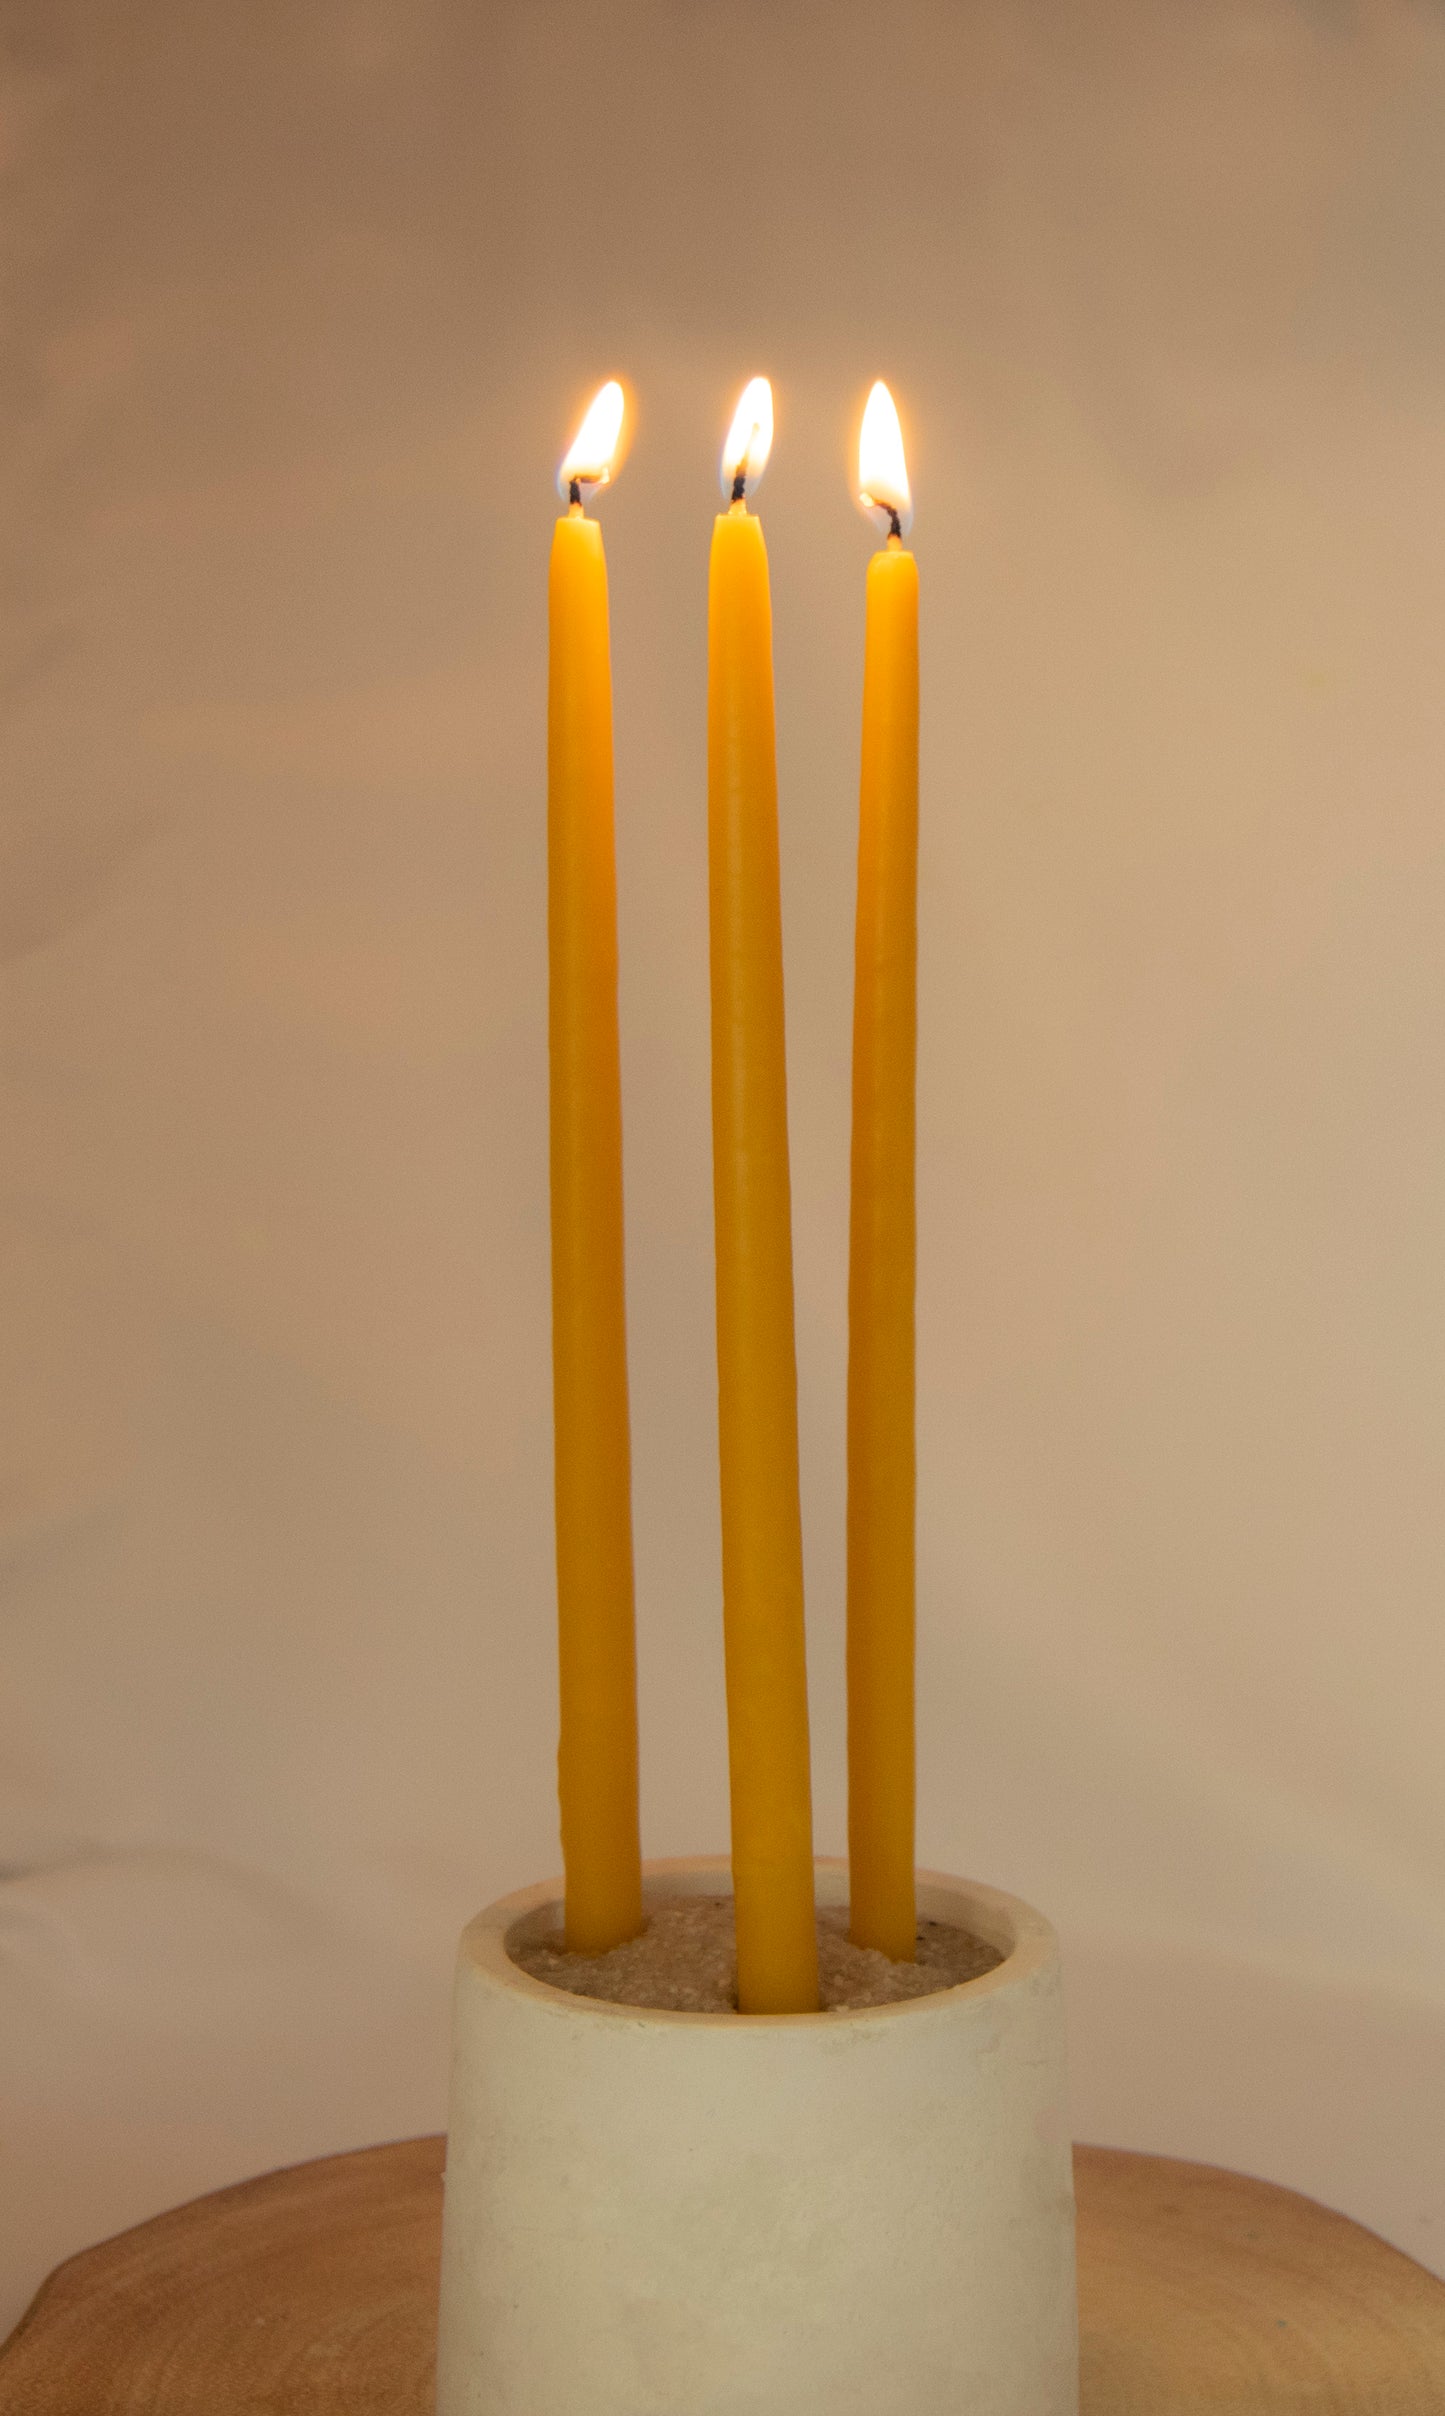 100 % Beeswax Church Candles - Orthodox Slim Candles